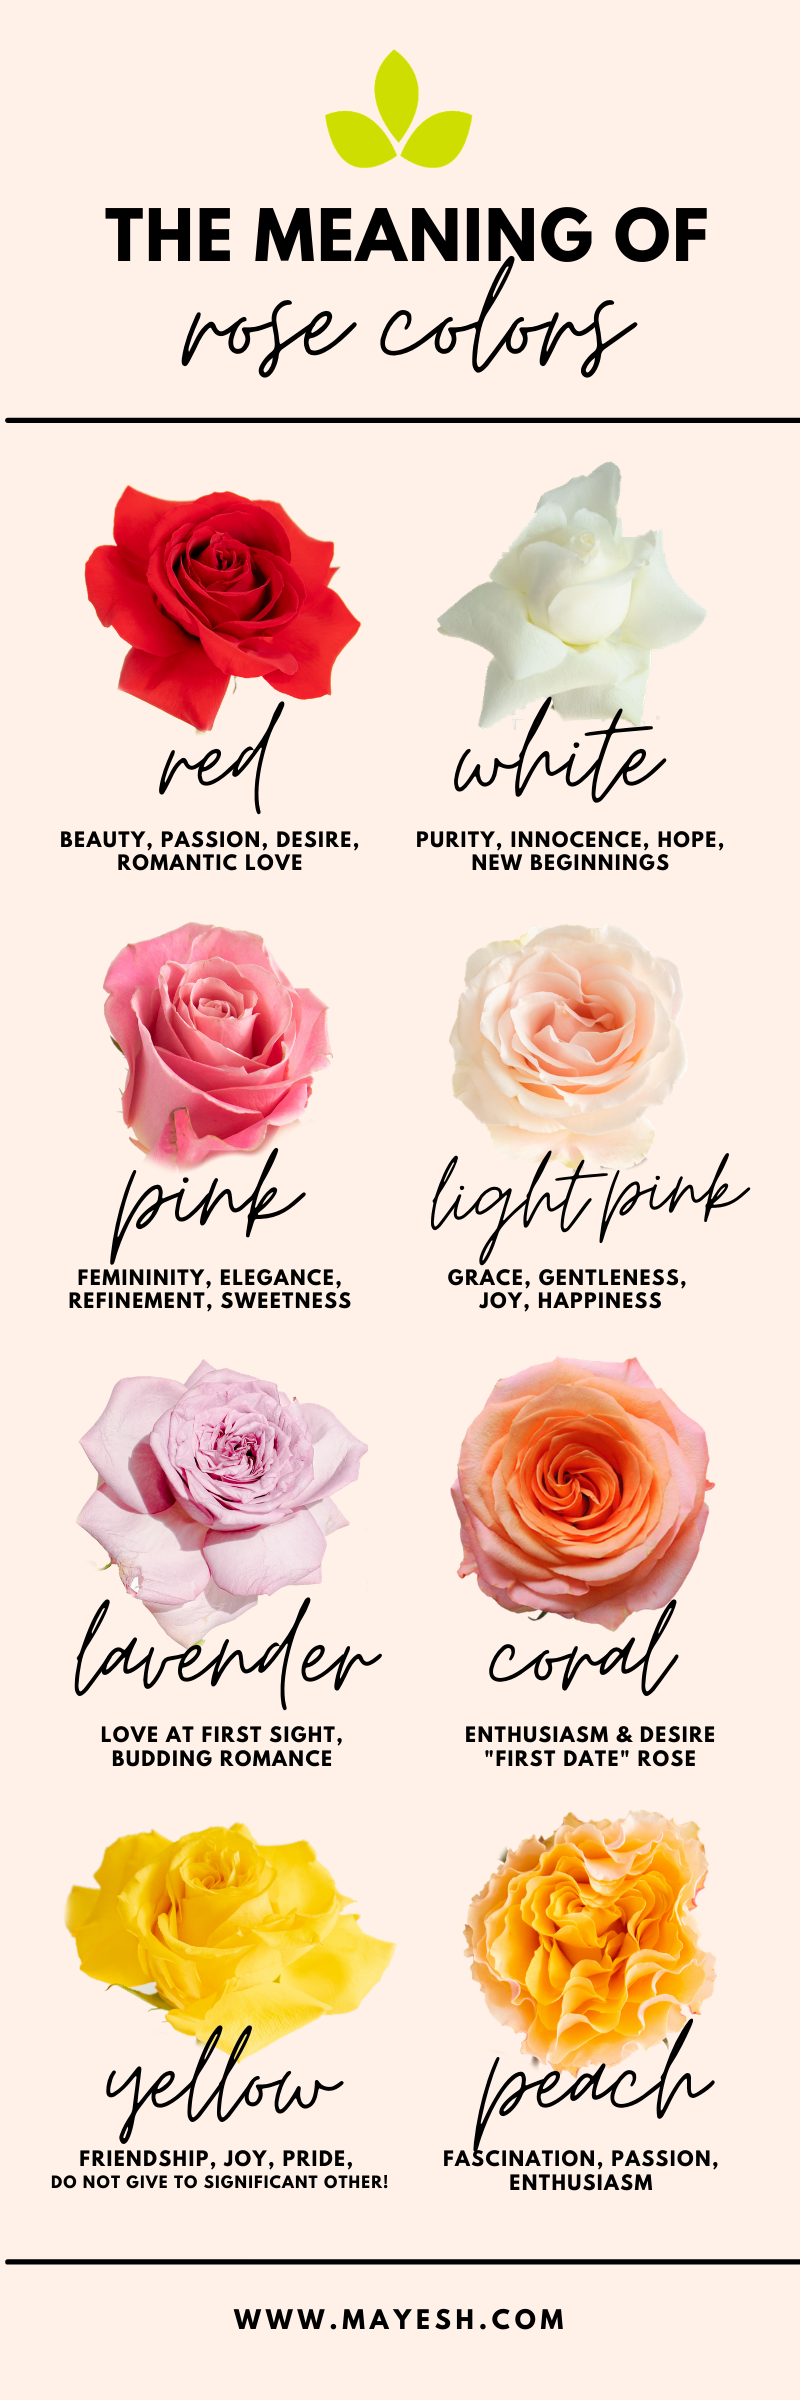 Rose Color Meaning Infographic ?width=800&name=Rose Color Meaning Infographic 